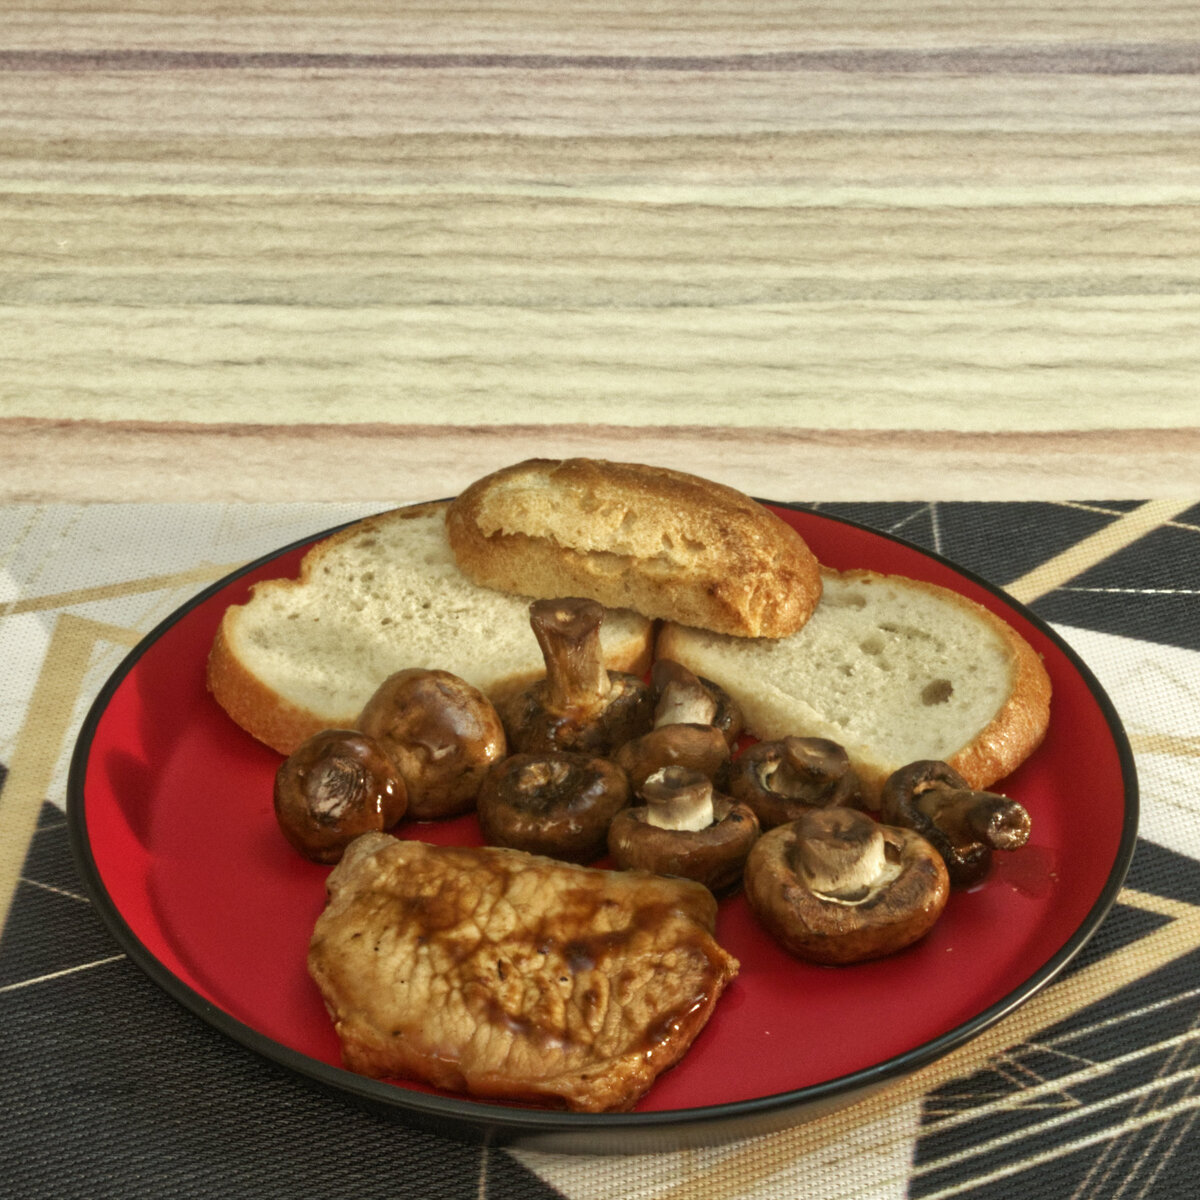 Boneless Pork Cutlet with Mushrooms and Sour Dough Bread